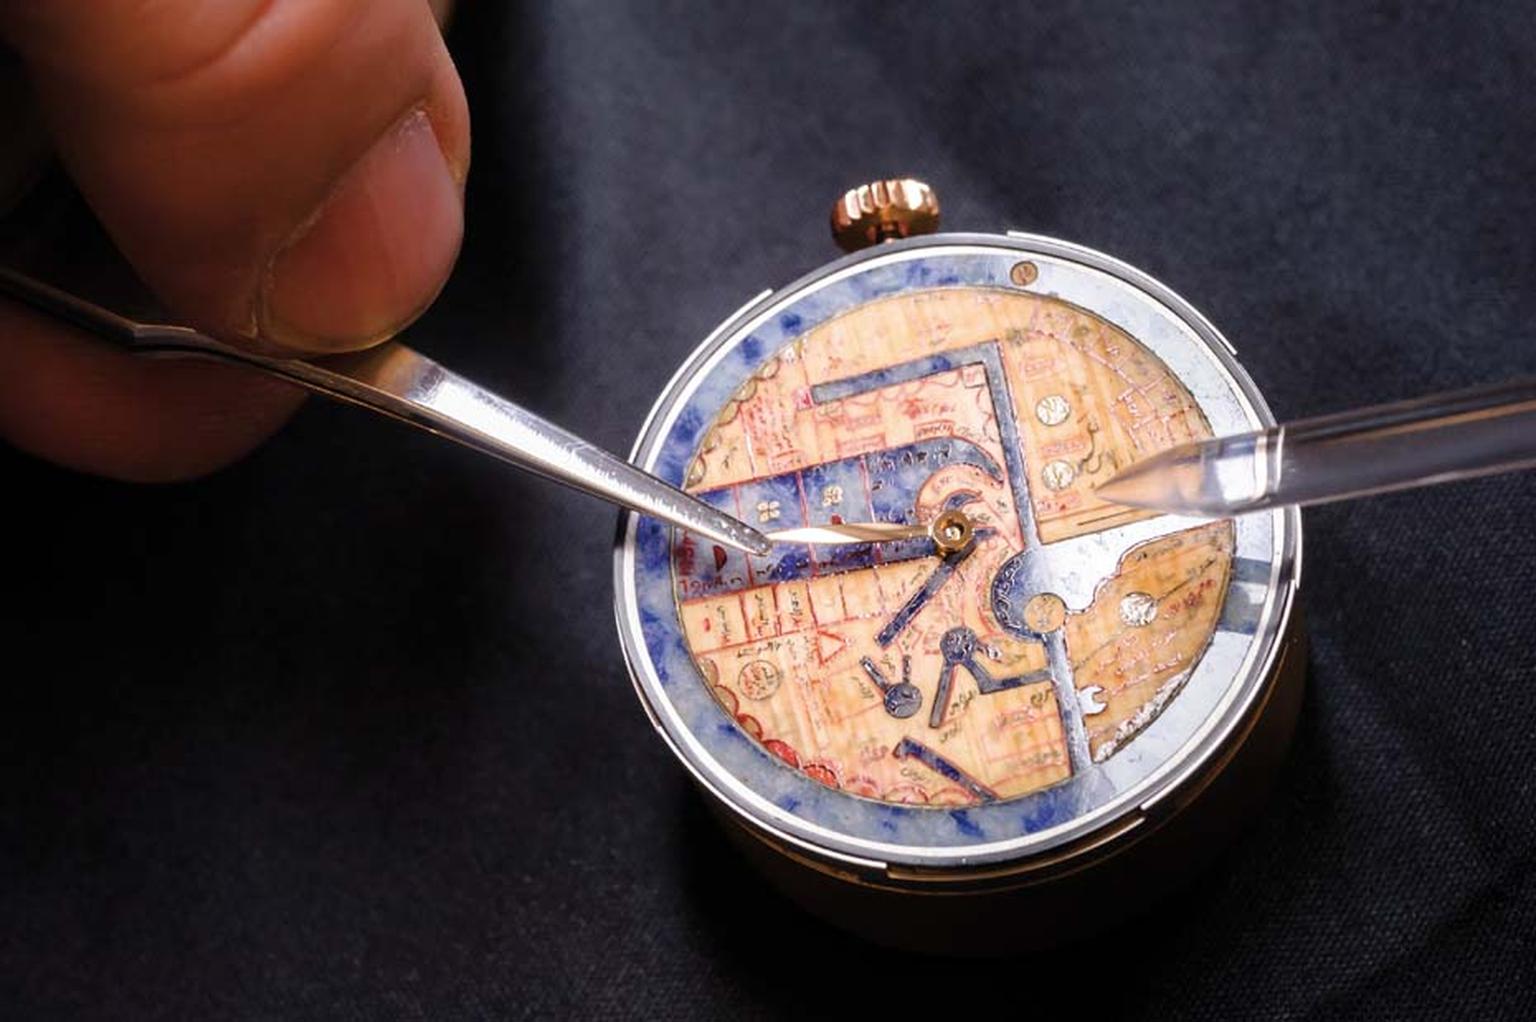 The blue sodalite stone on the dial of the Pearl of Wonders watch has been decorated with miniature inlaid pieces of papyrus to recreate the texture and colour of the original parchment.